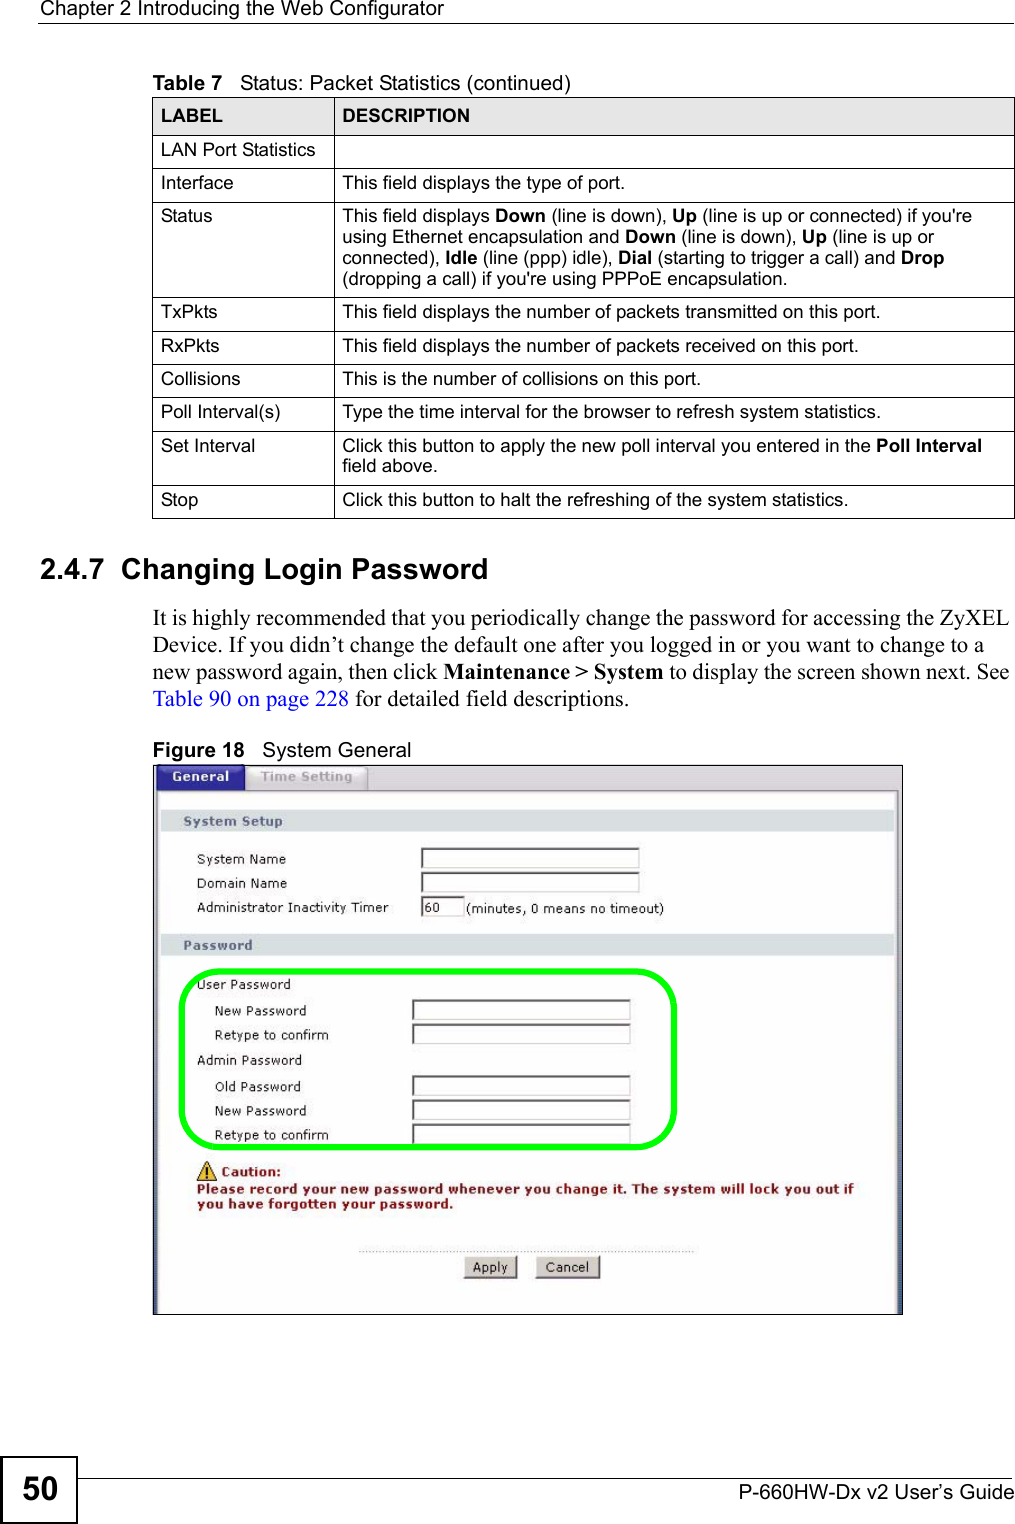 Chapter 2 Introducing the Web ConfiguratorP-660HW-Dx v2 User’s Guide502.4.7  Changing Login Password It is highly recommended that you periodically change the password for accessing the ZyXEL Device. If you didn’t change the default one after you logged in or you want to change to a new password again, then click Maintenance &gt; System to display the screen shown next. See Table 90 on page 228 for detailed field descriptions.Figure 18   System GeneralLAN Port StatisticsInterface This field displays the type of port.Status This field displays Down (line is down), Up (line is up or connected) if you&apos;re using Ethernet encapsulation and Down (line is down), Up (line is up or connected), Idle (line (ppp) idle), Dial (starting to trigger a call) and Drop (dropping a call) if you&apos;re using PPPoE encapsulation.TxPkts This field displays the number of packets transmitted on this port.RxPkts This field displays the number of packets received on this port.Collisions This is the number of collisions on this port.Poll Interval(s) Type the time interval for the browser to refresh system statistics.Set Interval Click this button to apply the new poll interval you entered in the Poll Interval field above.Stop Click this button to halt the refreshing of the system statistics.Table 7   Status: Packet Statistics (continued)LABEL DESCRIPTION